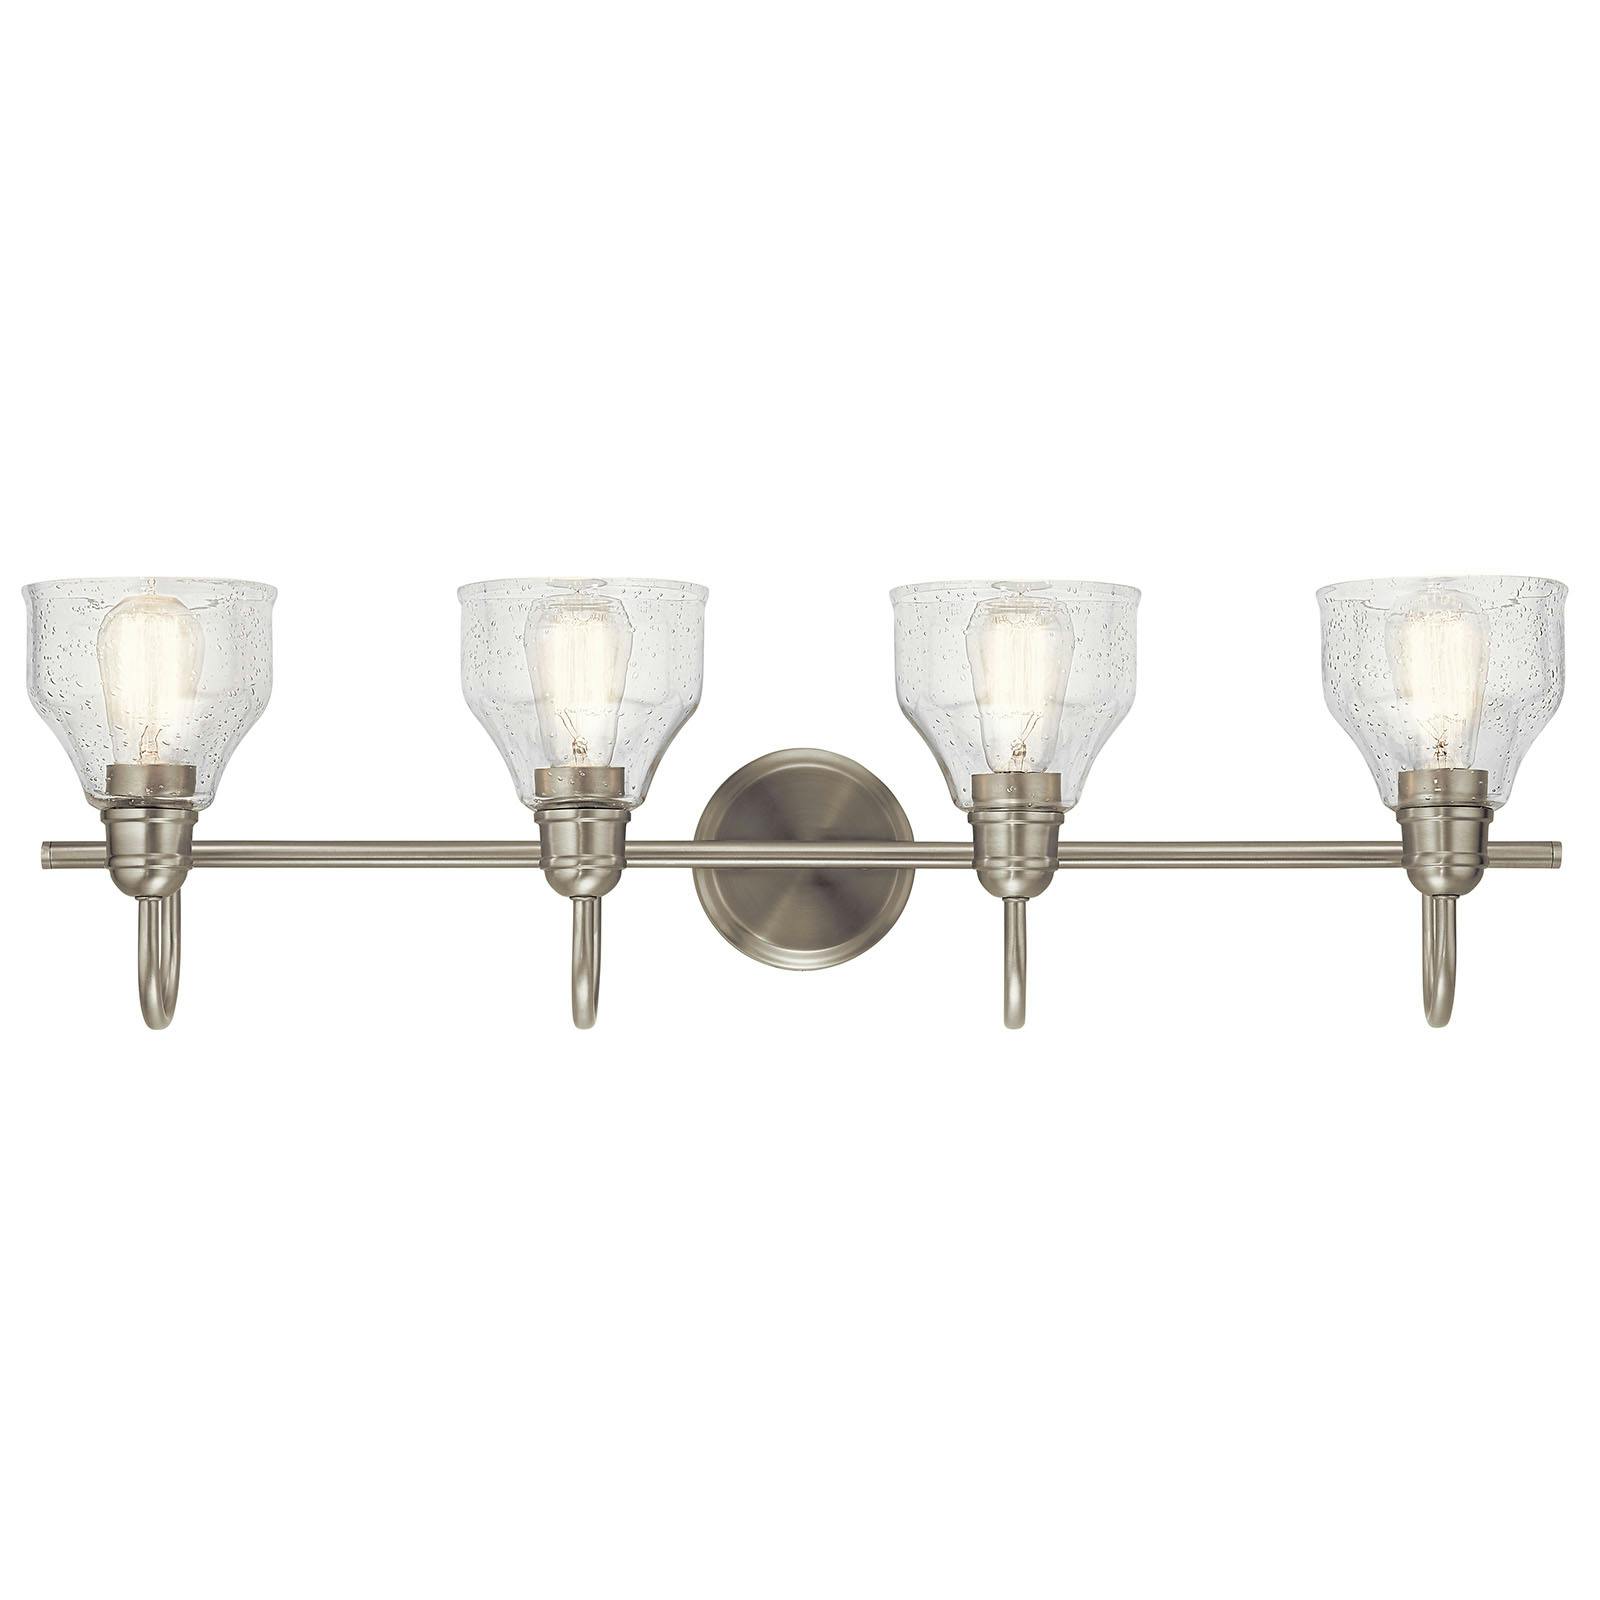 The Avery 4 Light Vanity Light Brushed Nickel facing up on a white background